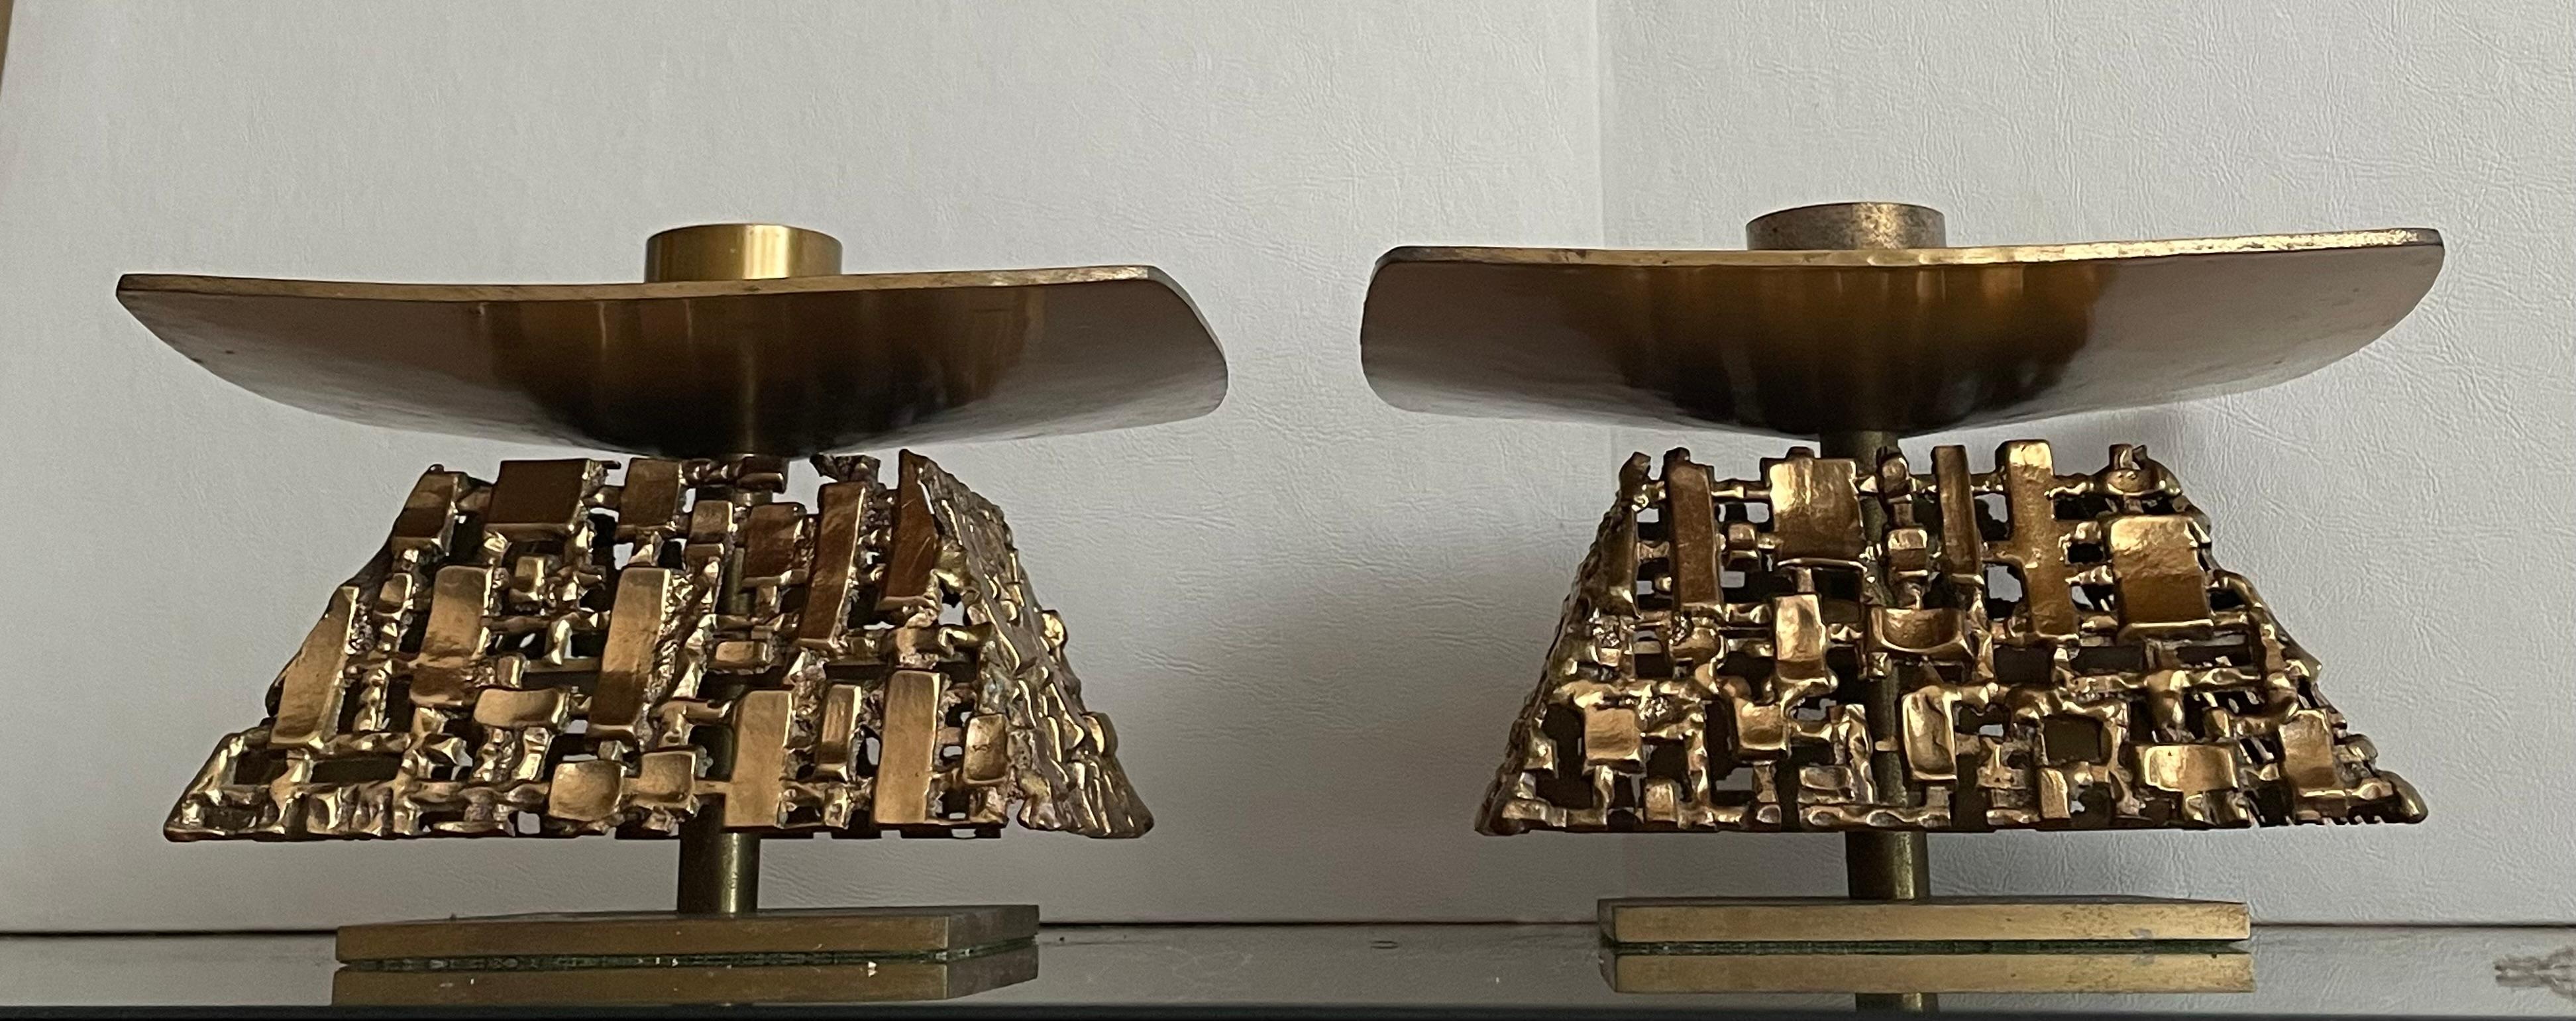 1960s Sculpted Brass Oversized Brutalist Candle Holders  In Good Condition For Sale In Bensalem, PA